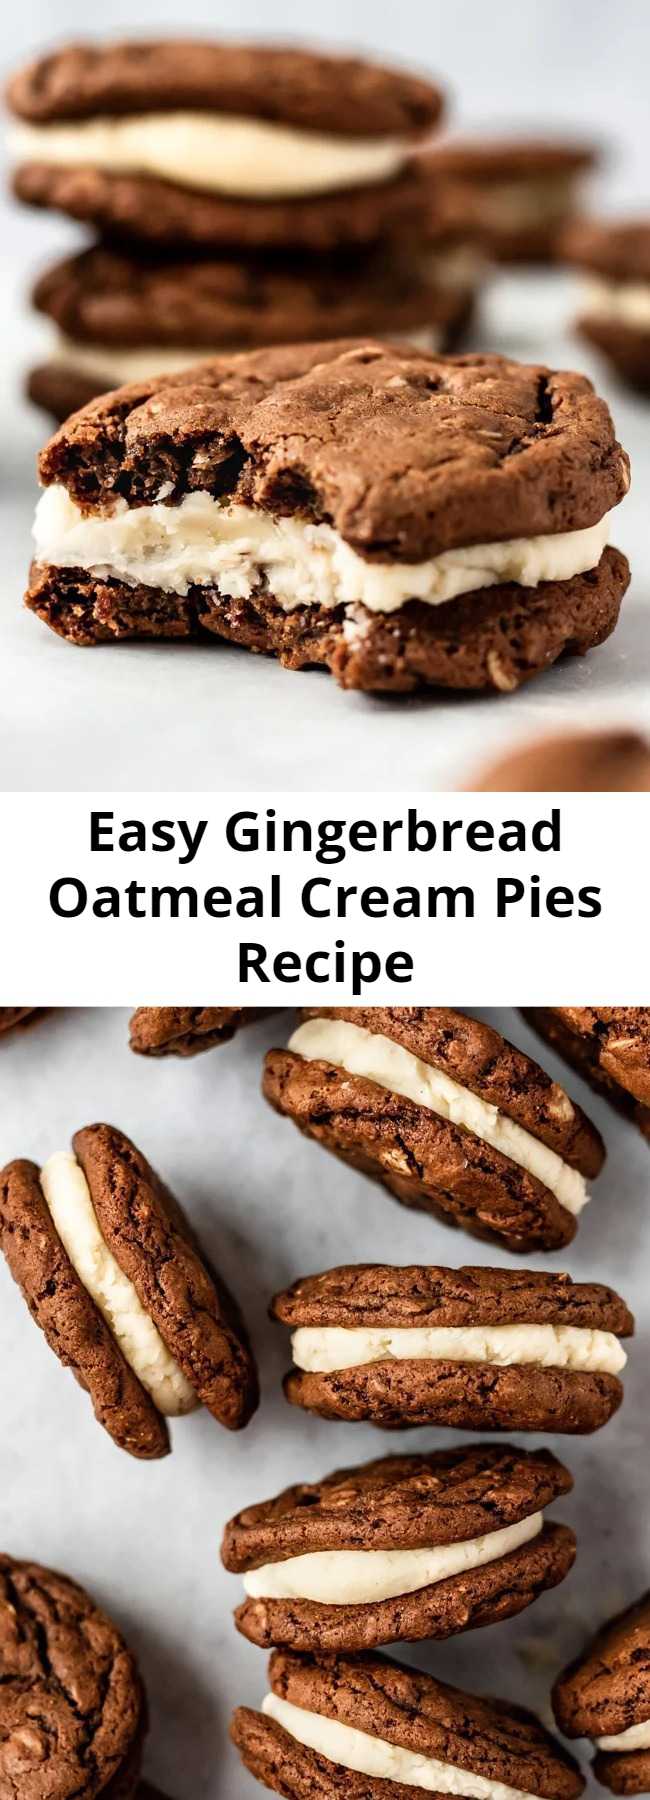 Easy Gingerbread Oatmeal Cream Pies Recipe - Amazing oatmeal cream pies with a gingerbread twist! These perfectly spiced gingerbread oatmeal cookies are sandwiched together with a delicious thick cream filling for the ultimate holiday cookie sandwich. #oatmealcookies #cookies #cookierecipe #baking